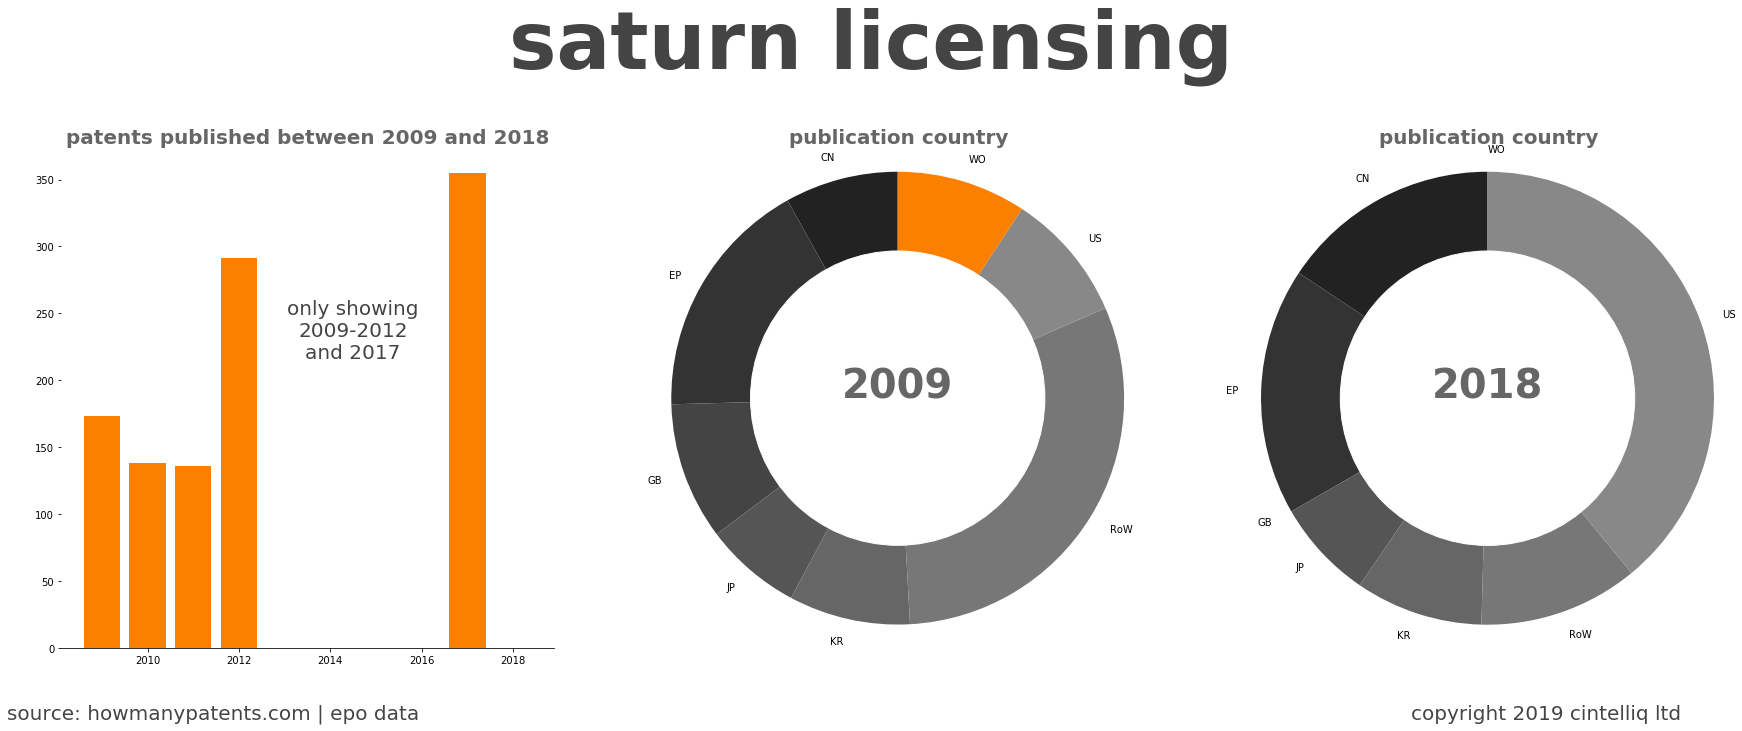 summary of patents for Saturn Licensing